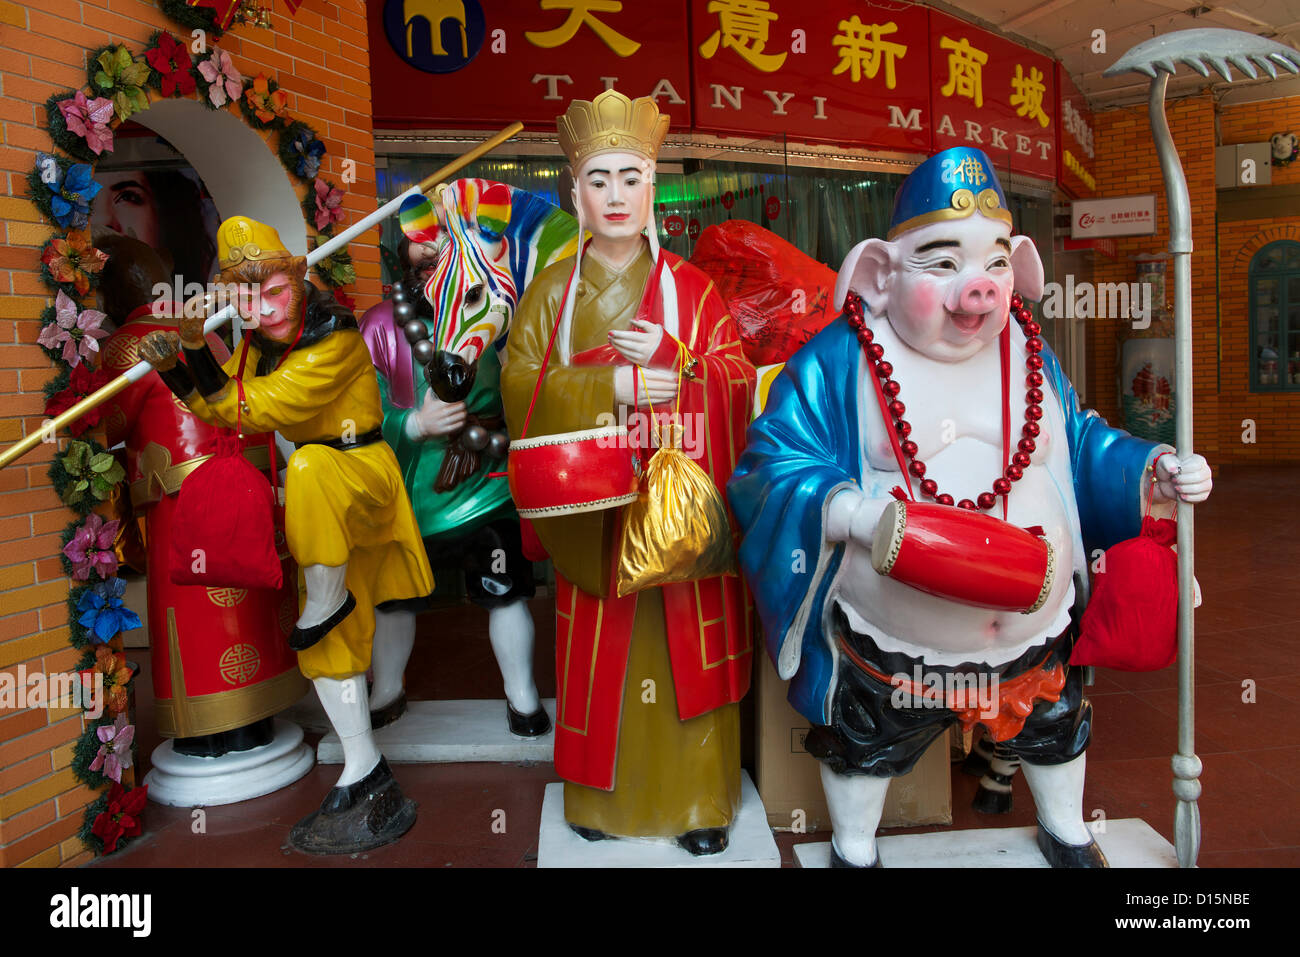 Figures of Chinese Classical Novel Journey to the West (Monkey), Xuanzang and his three protectors - Sun Wukong, Zhu Bajie and Sha Wujing, are decorated for Christmas celebration  outside a commodity market on December 8, 2012 in Beijing, China. Stock Photo